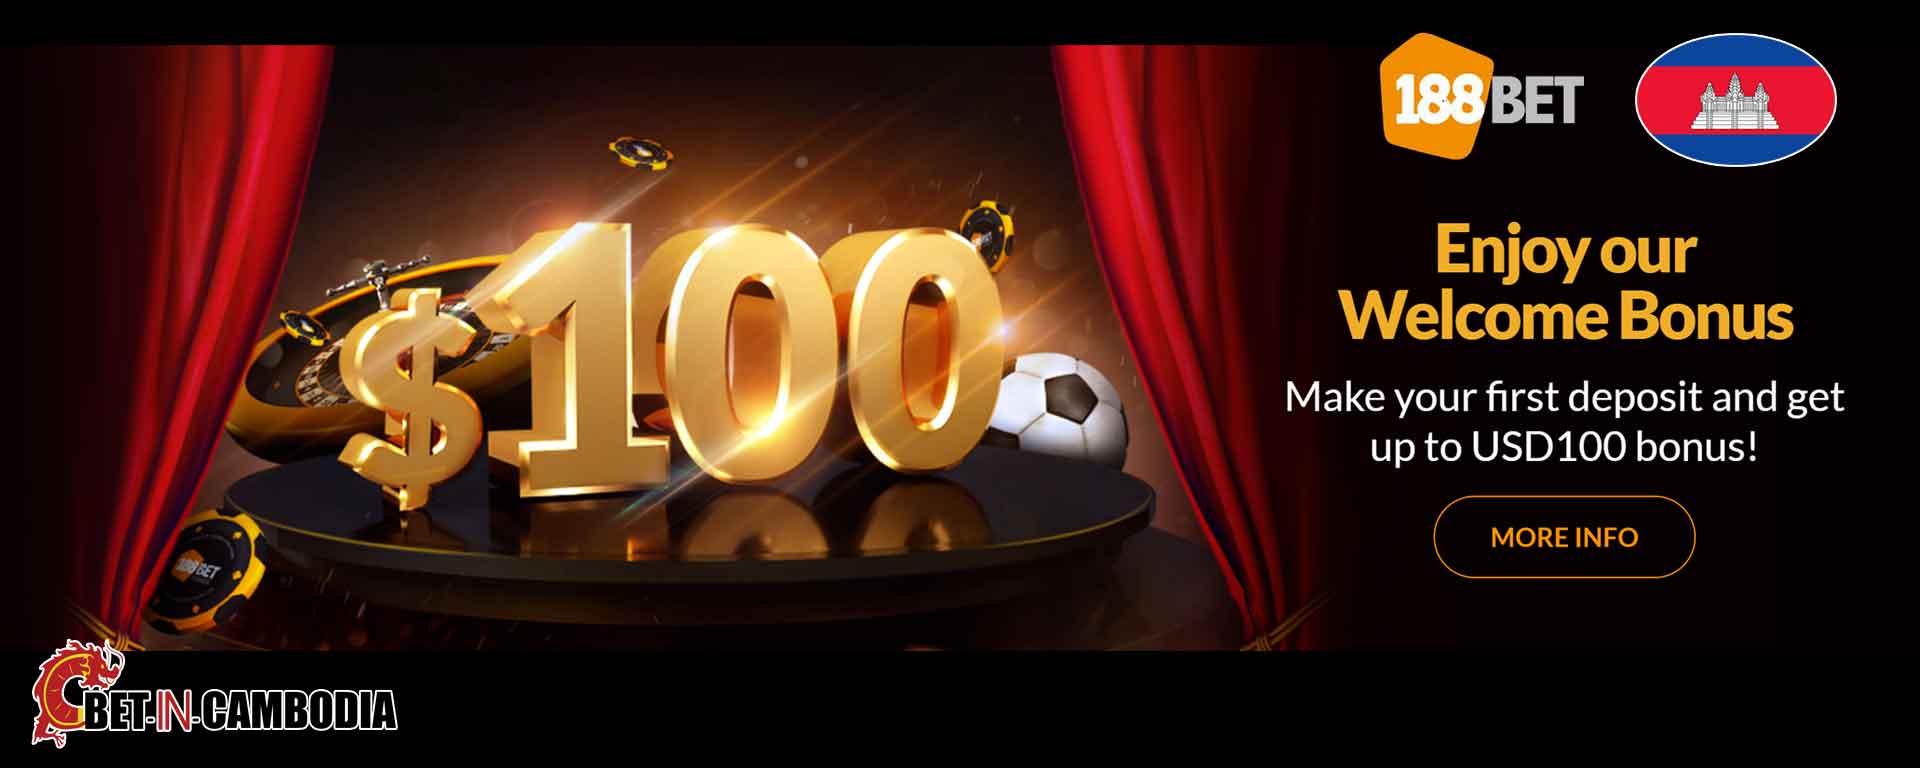 Get now the 188bet kh welcome bonus Football betting